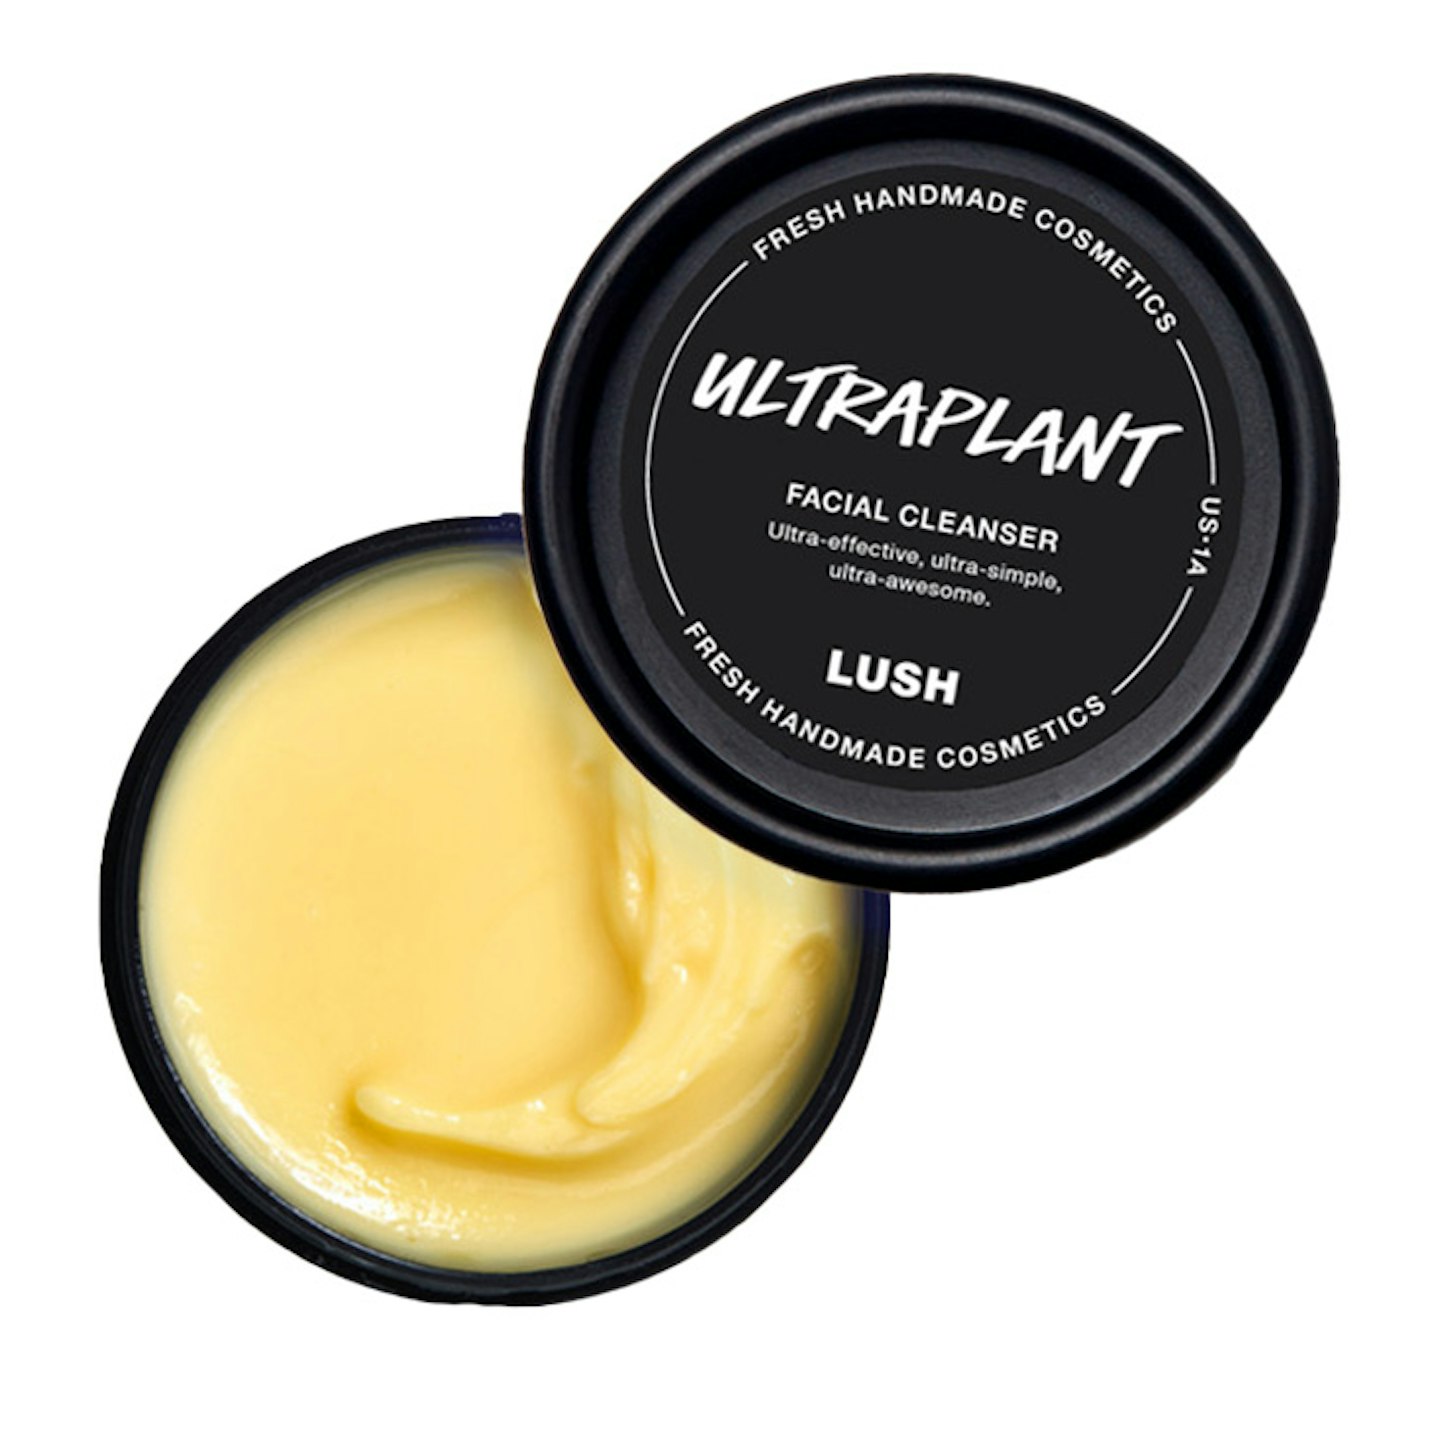 LUSH Ultraplant facial cleanser